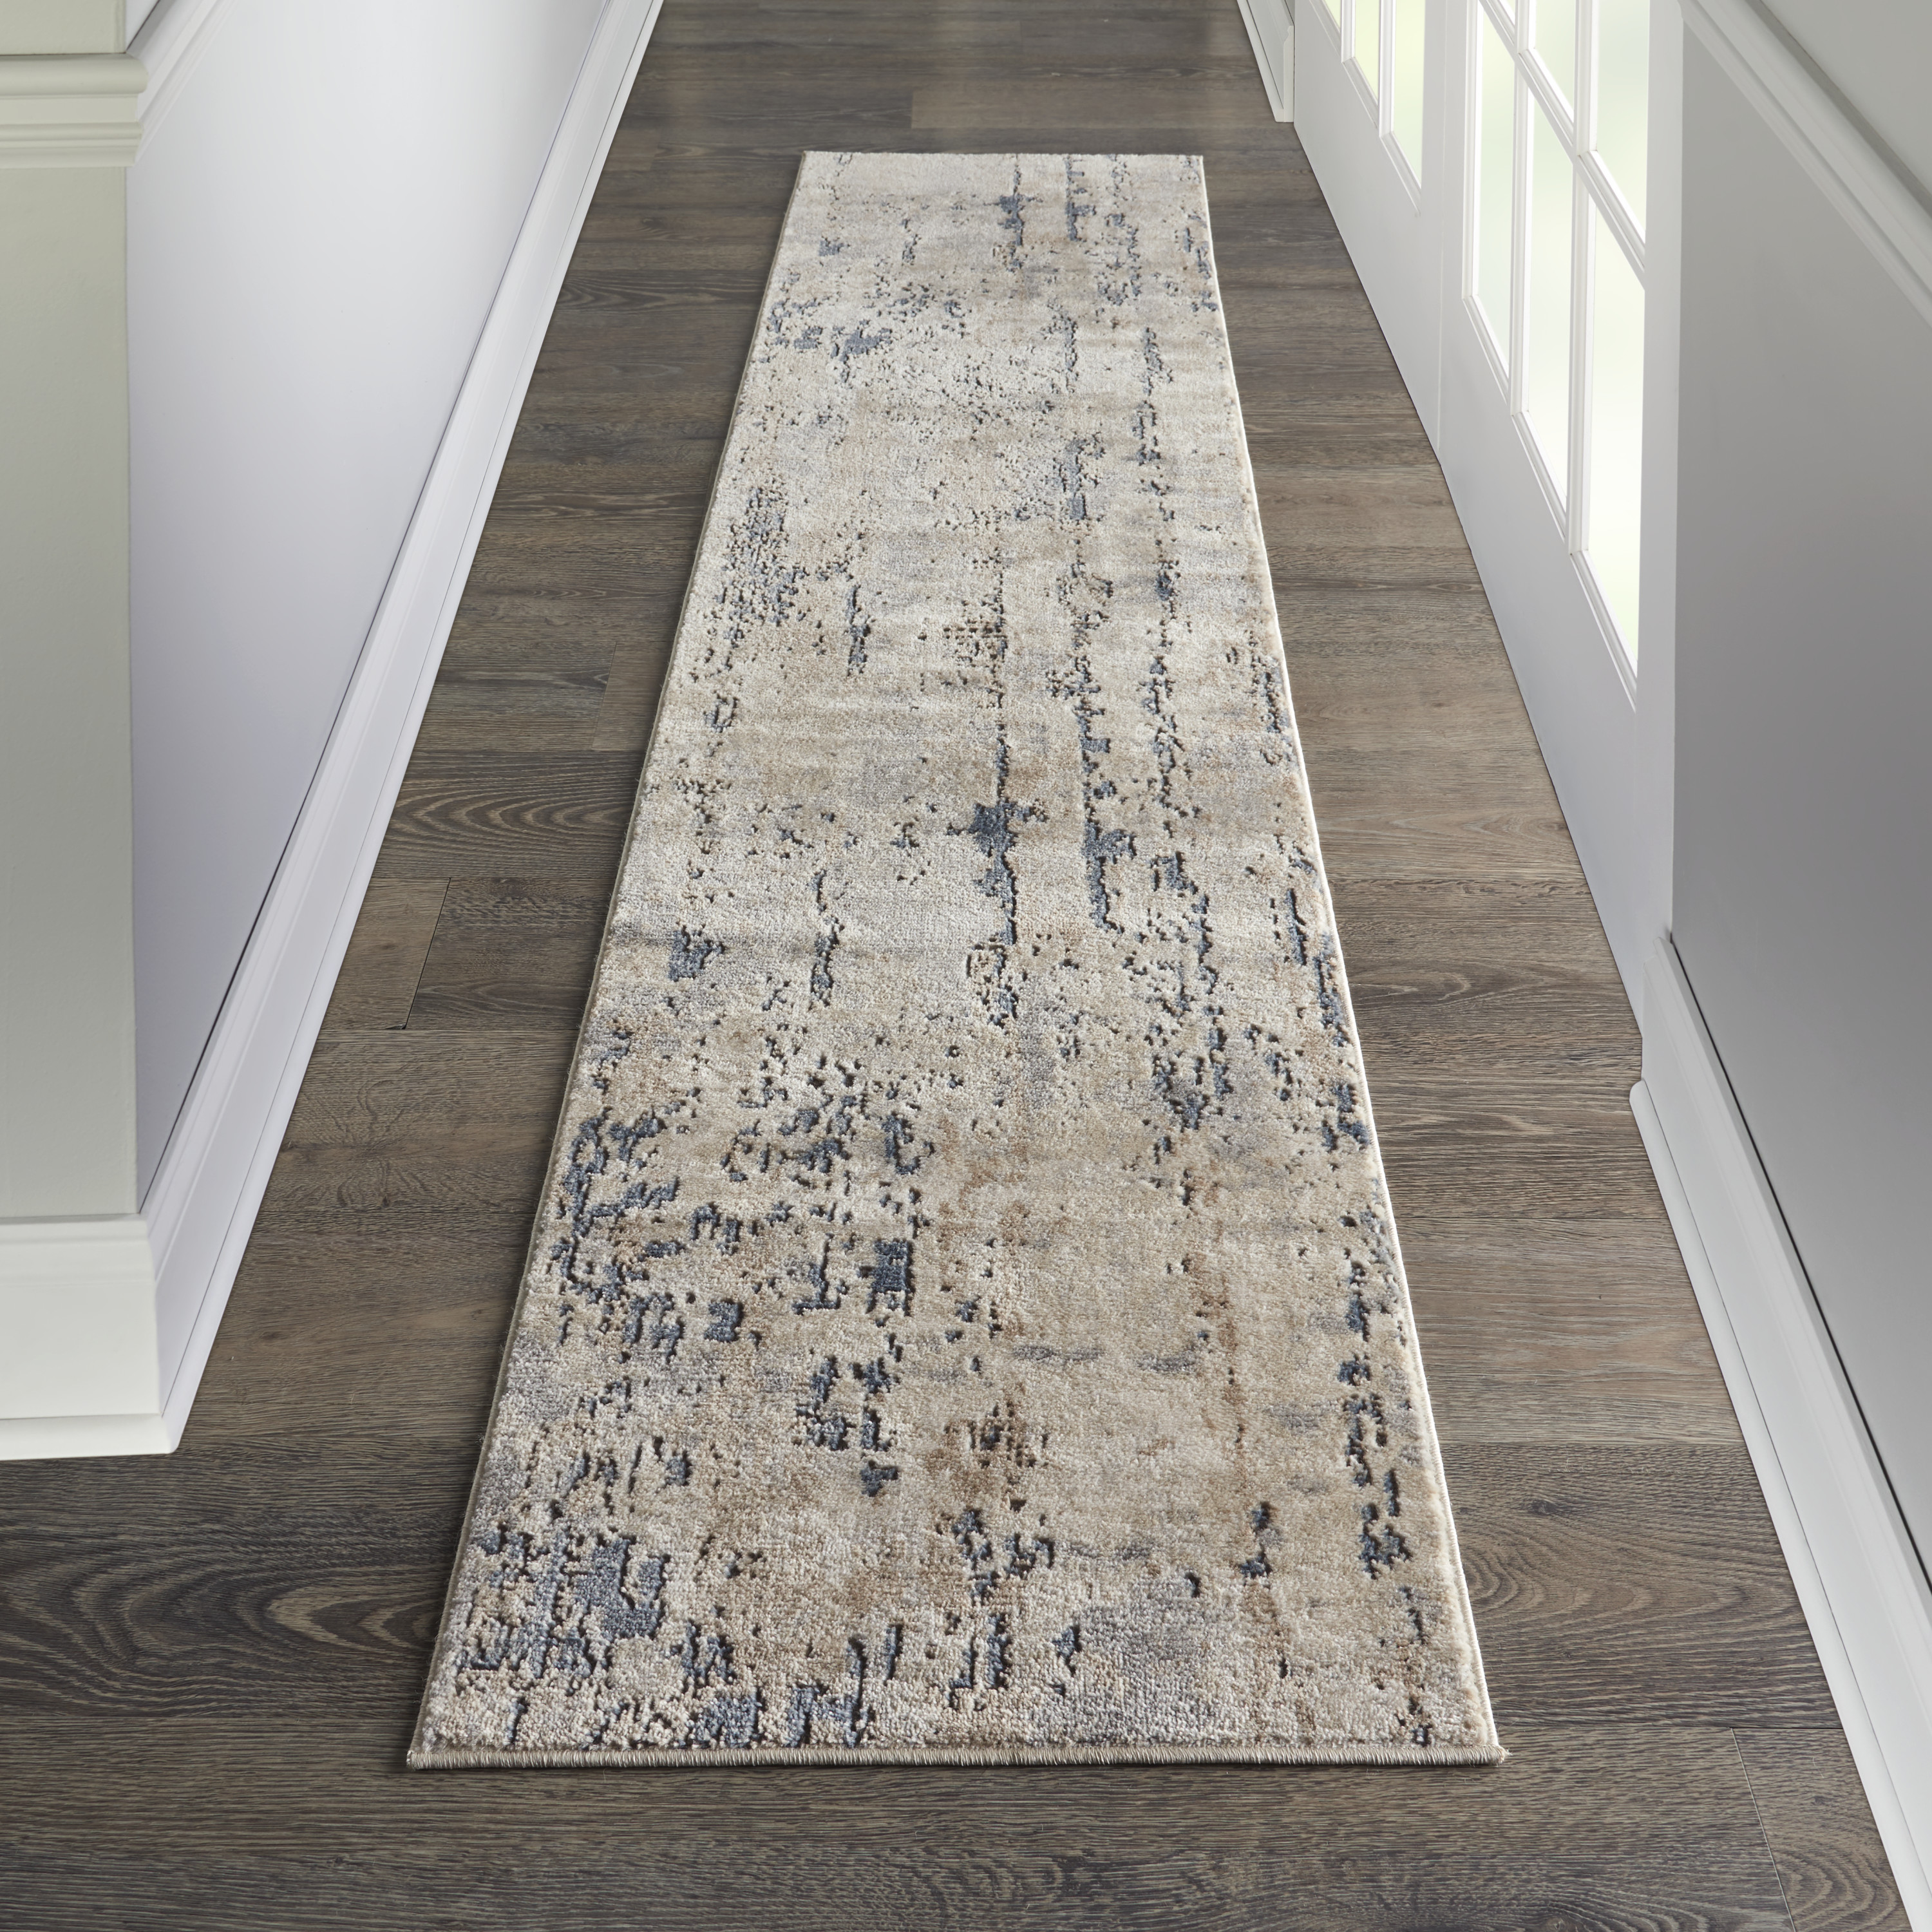 Nourison Concerto Abstract Beige Grey 2'2" x 20' Area Rug (2x20) - image 1 of 7